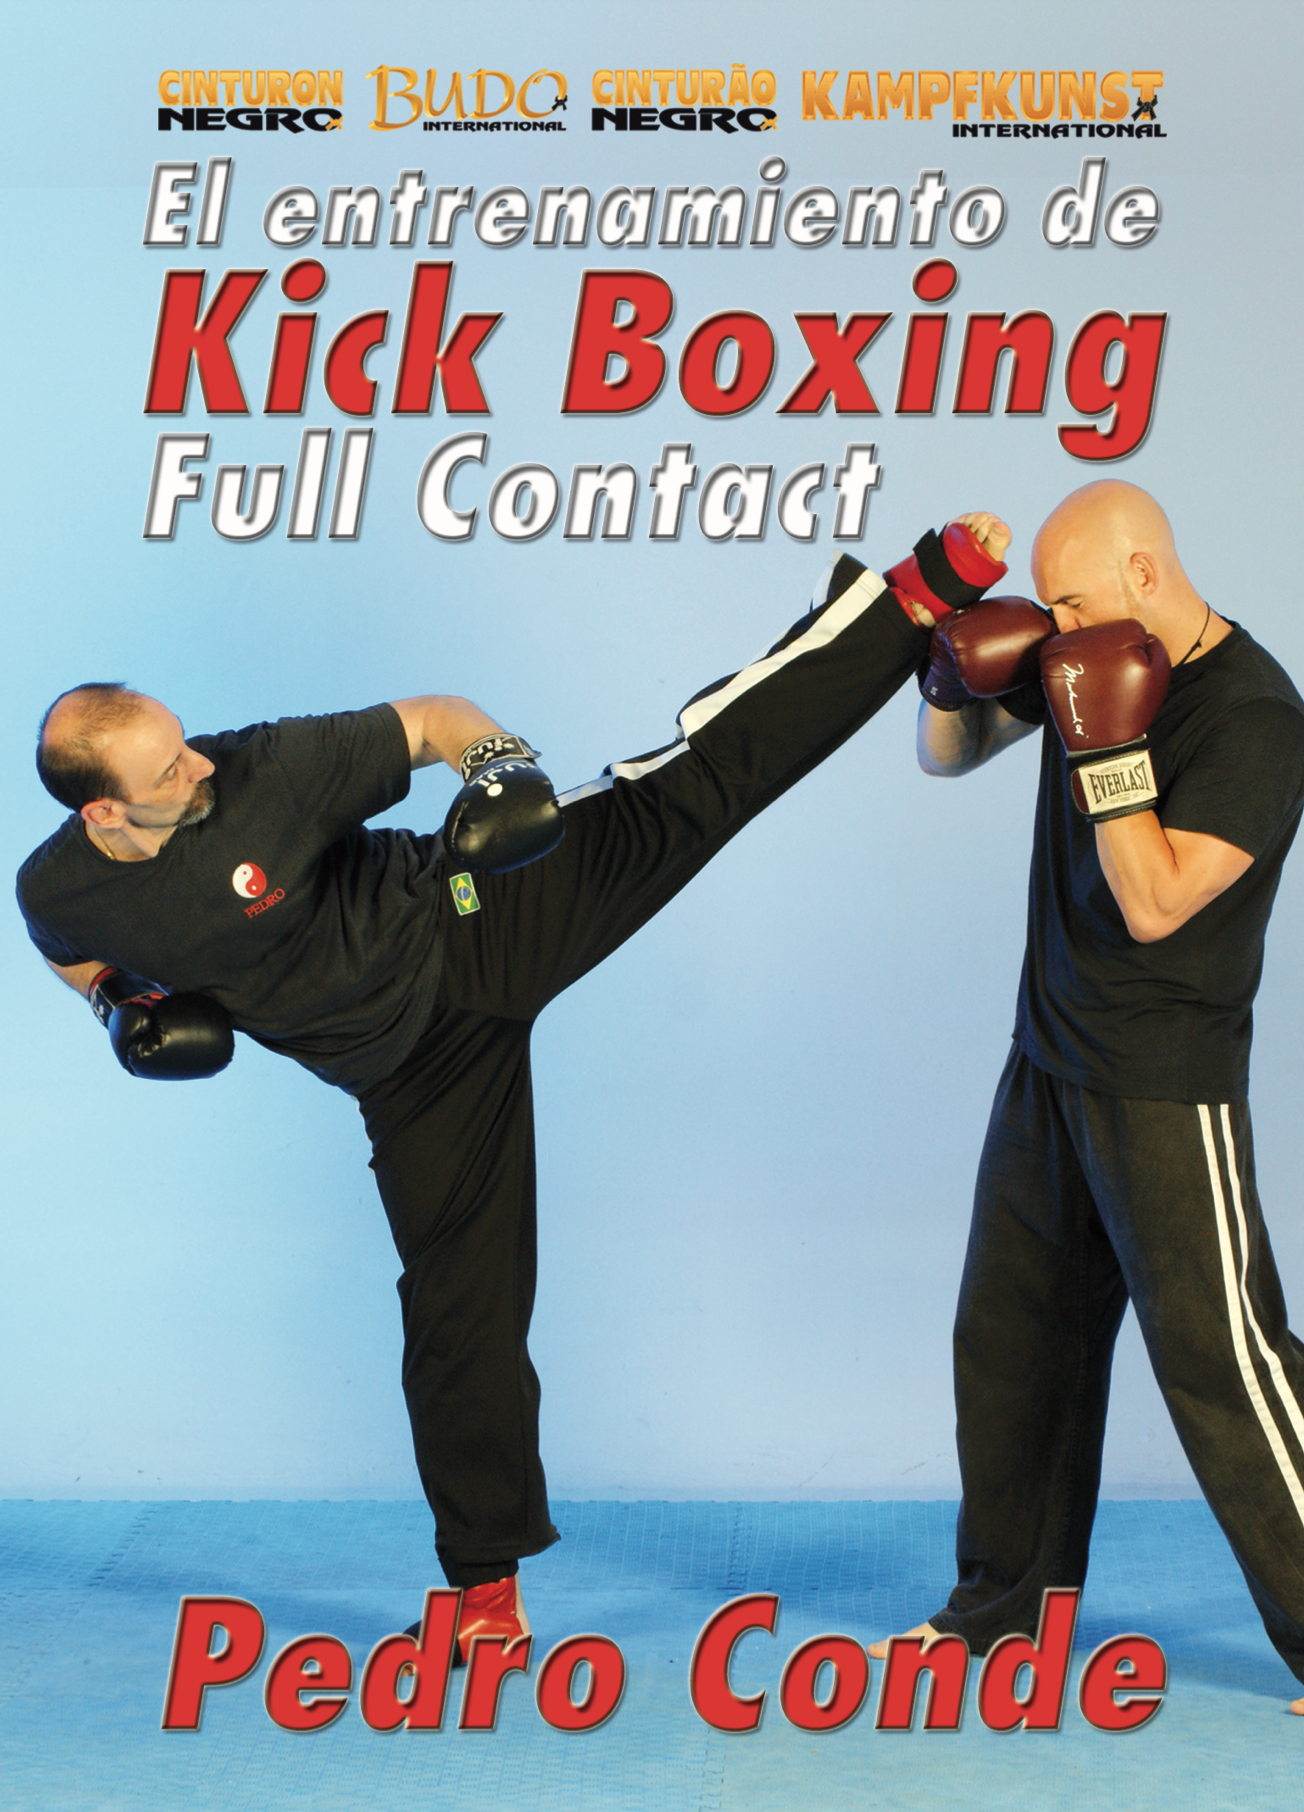 Full Contact Kickboxing DVD by Pedro Conde